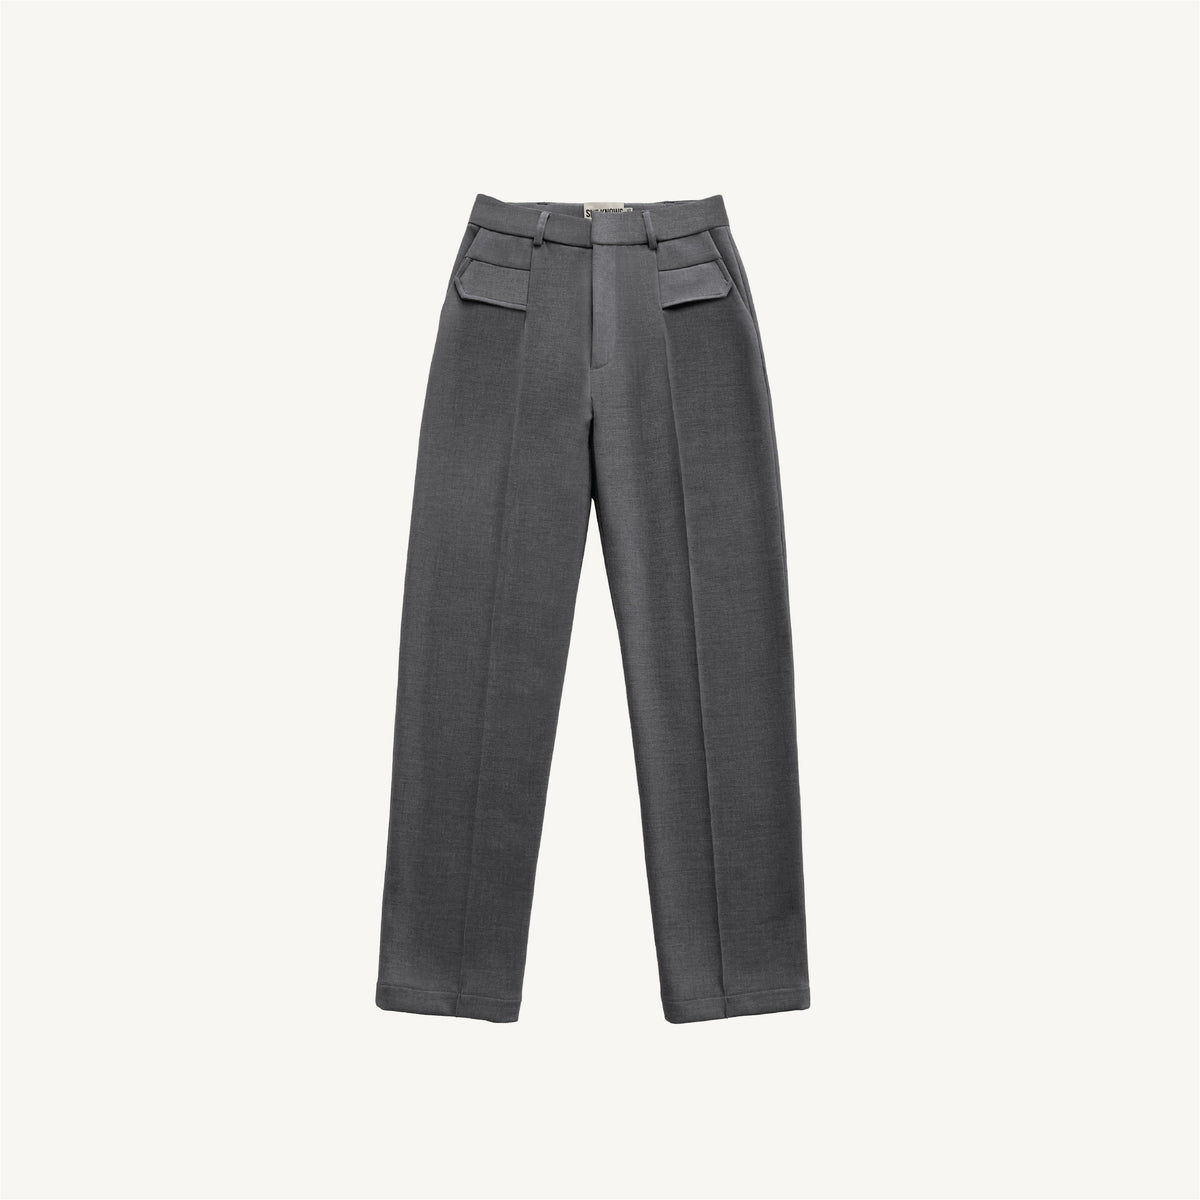 [PRE-ORDER] SHE KNOWS - Ivy Pants